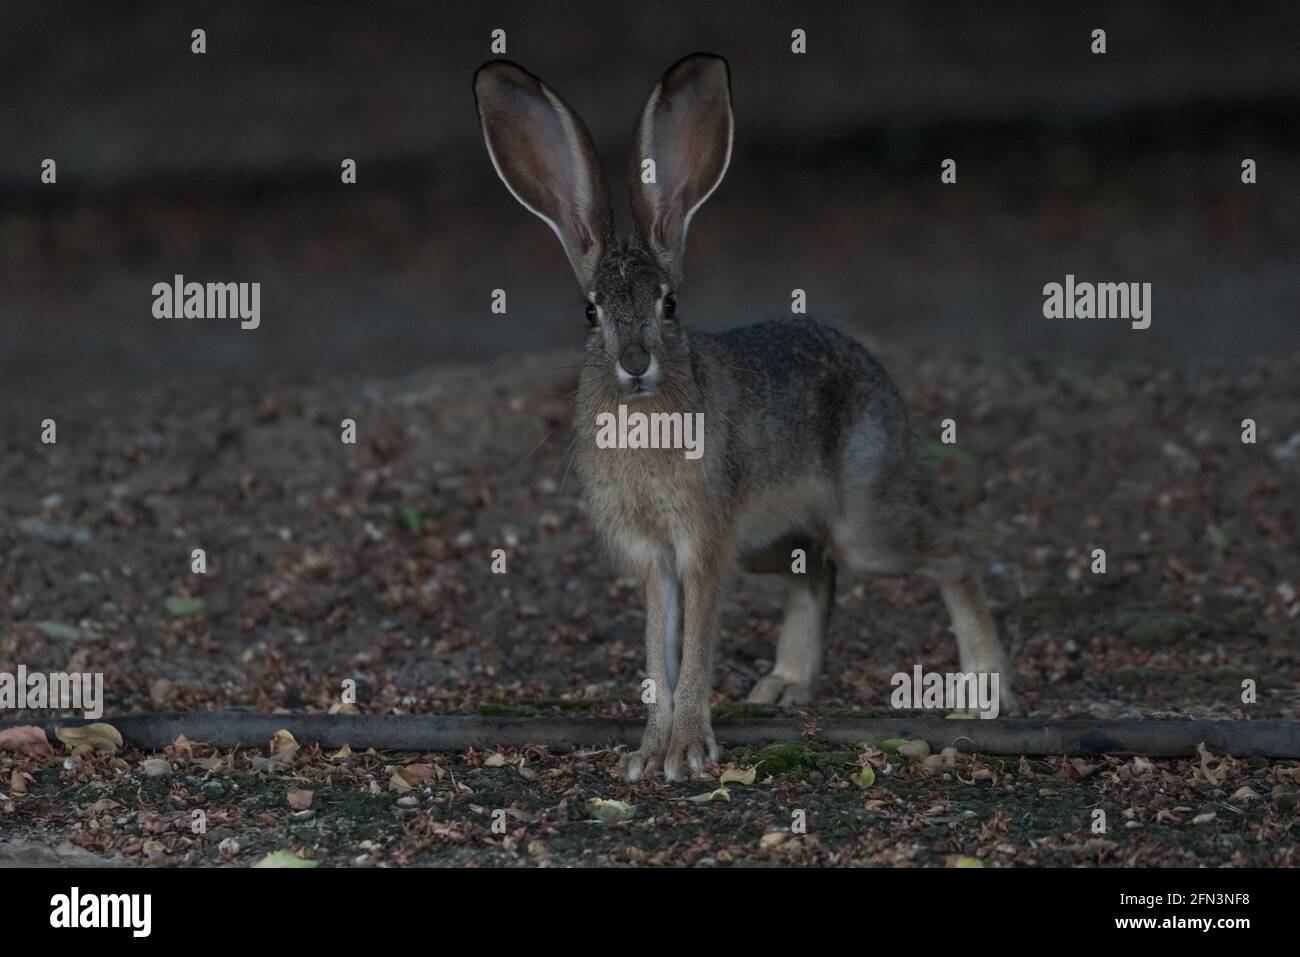 A black tailed jackrabbit (Lepus californicus) from San Joaquin wildlife refuge in the Central valley of California. Stock Photo